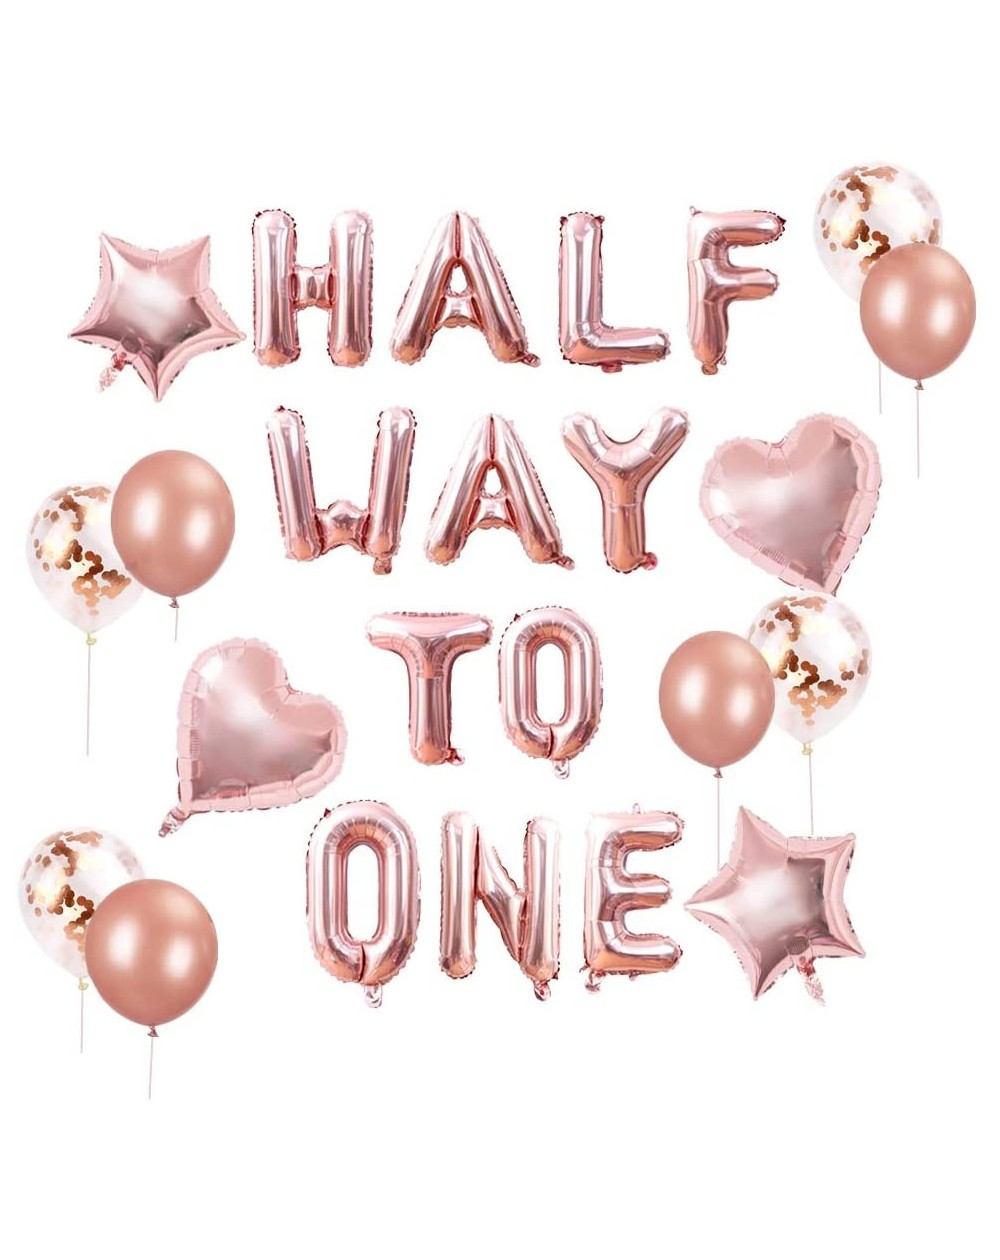 Balloons 15 PCS Rose Gold Half Way To One Banner Half Way To One Decorations for Girl 1/2 Birthday Decorations - C619EI0RTEU ...